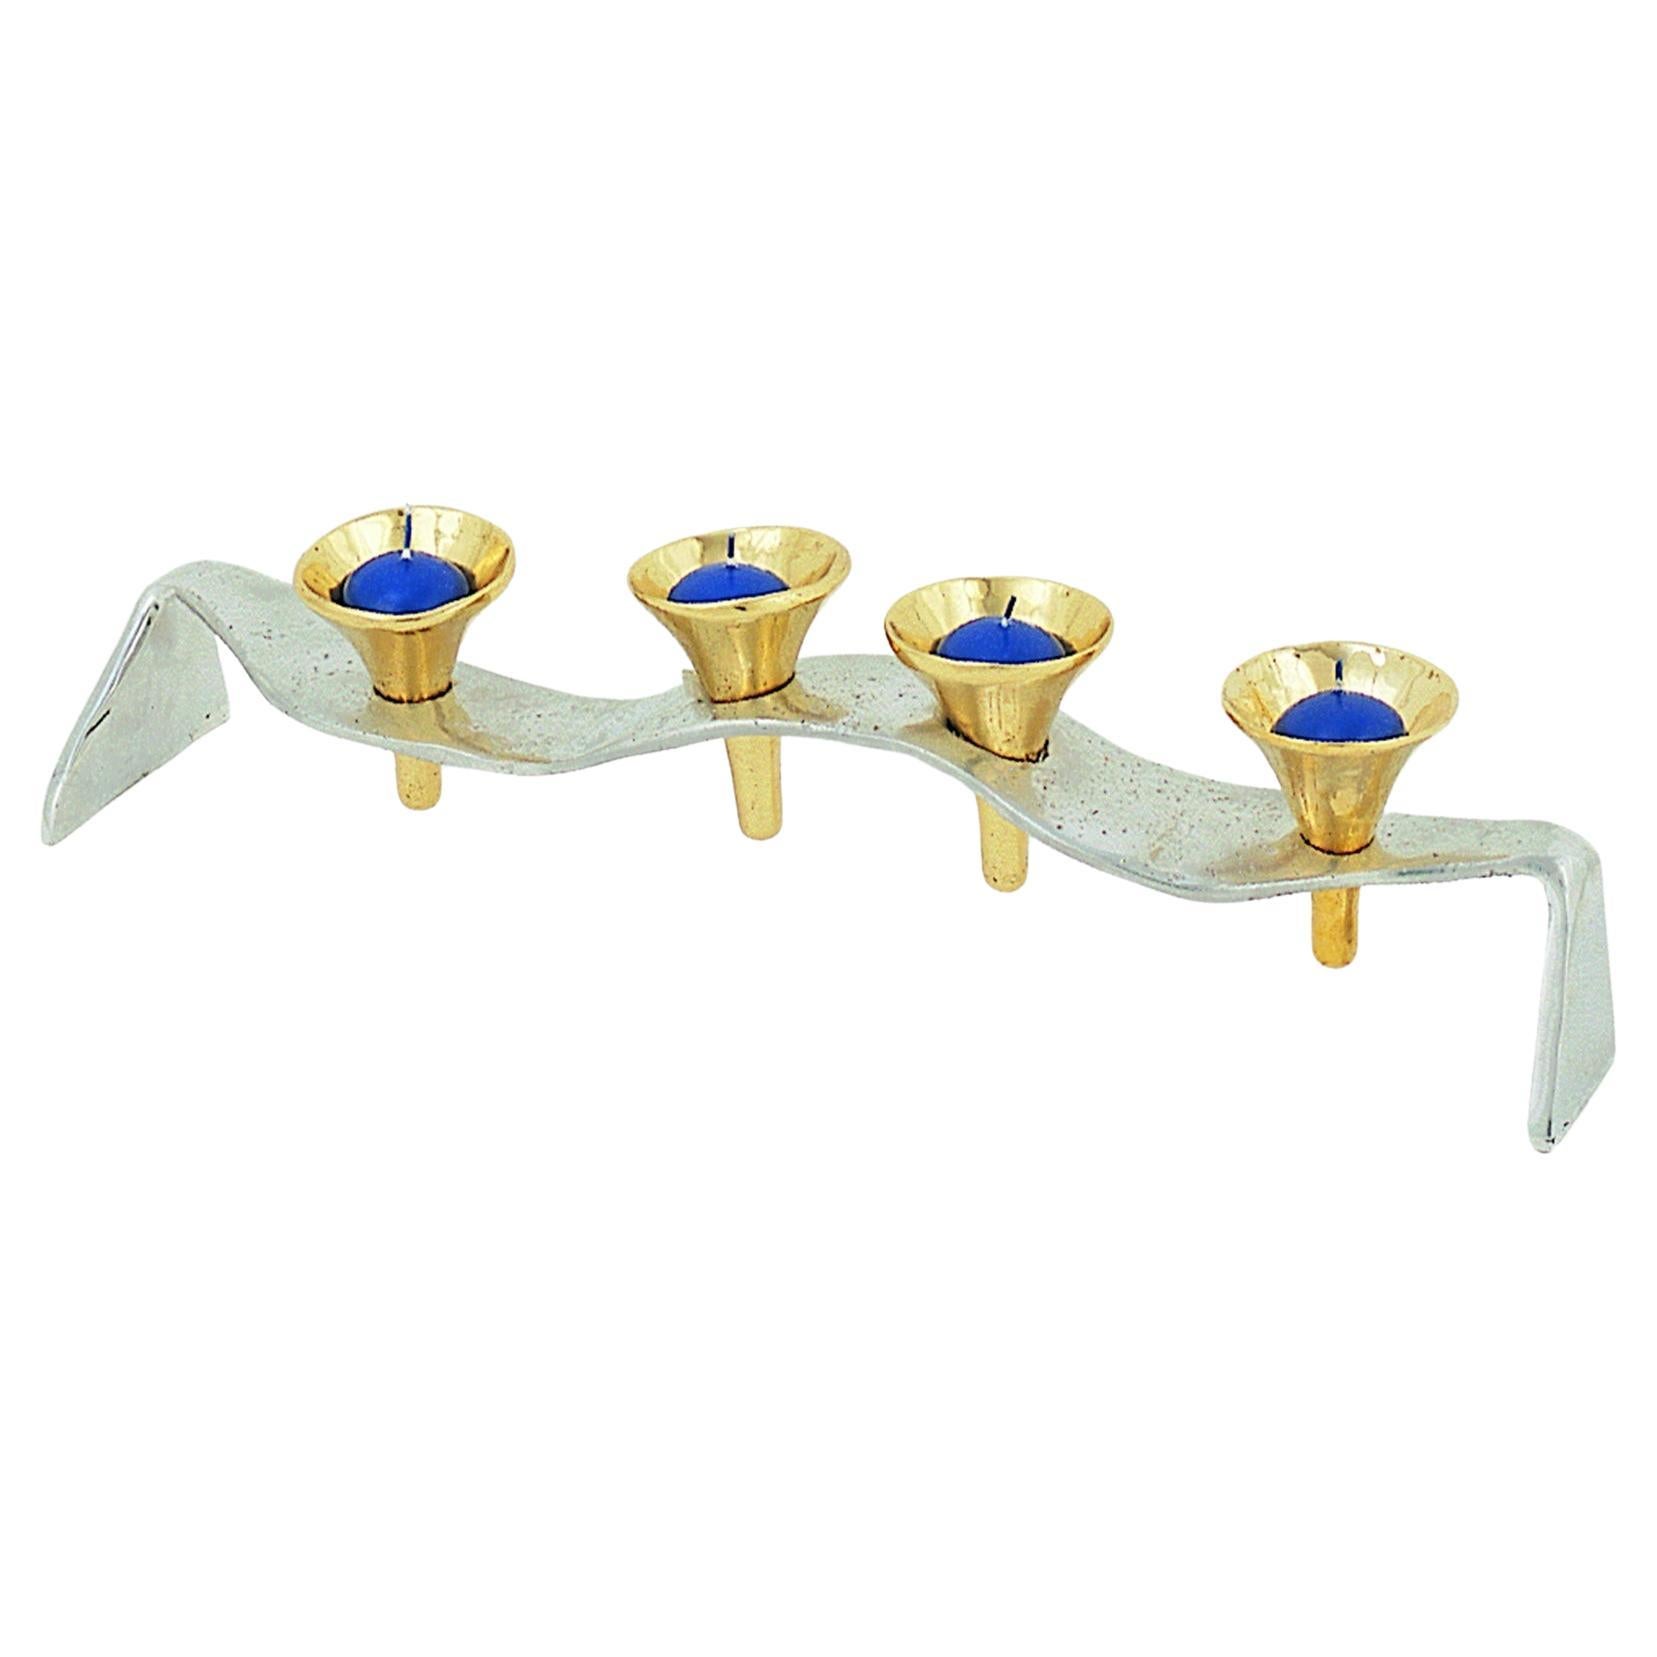 G067 Candelabra Sinuoso, Gold and Silver coloured Brass and Aluminium Handmade For Sale